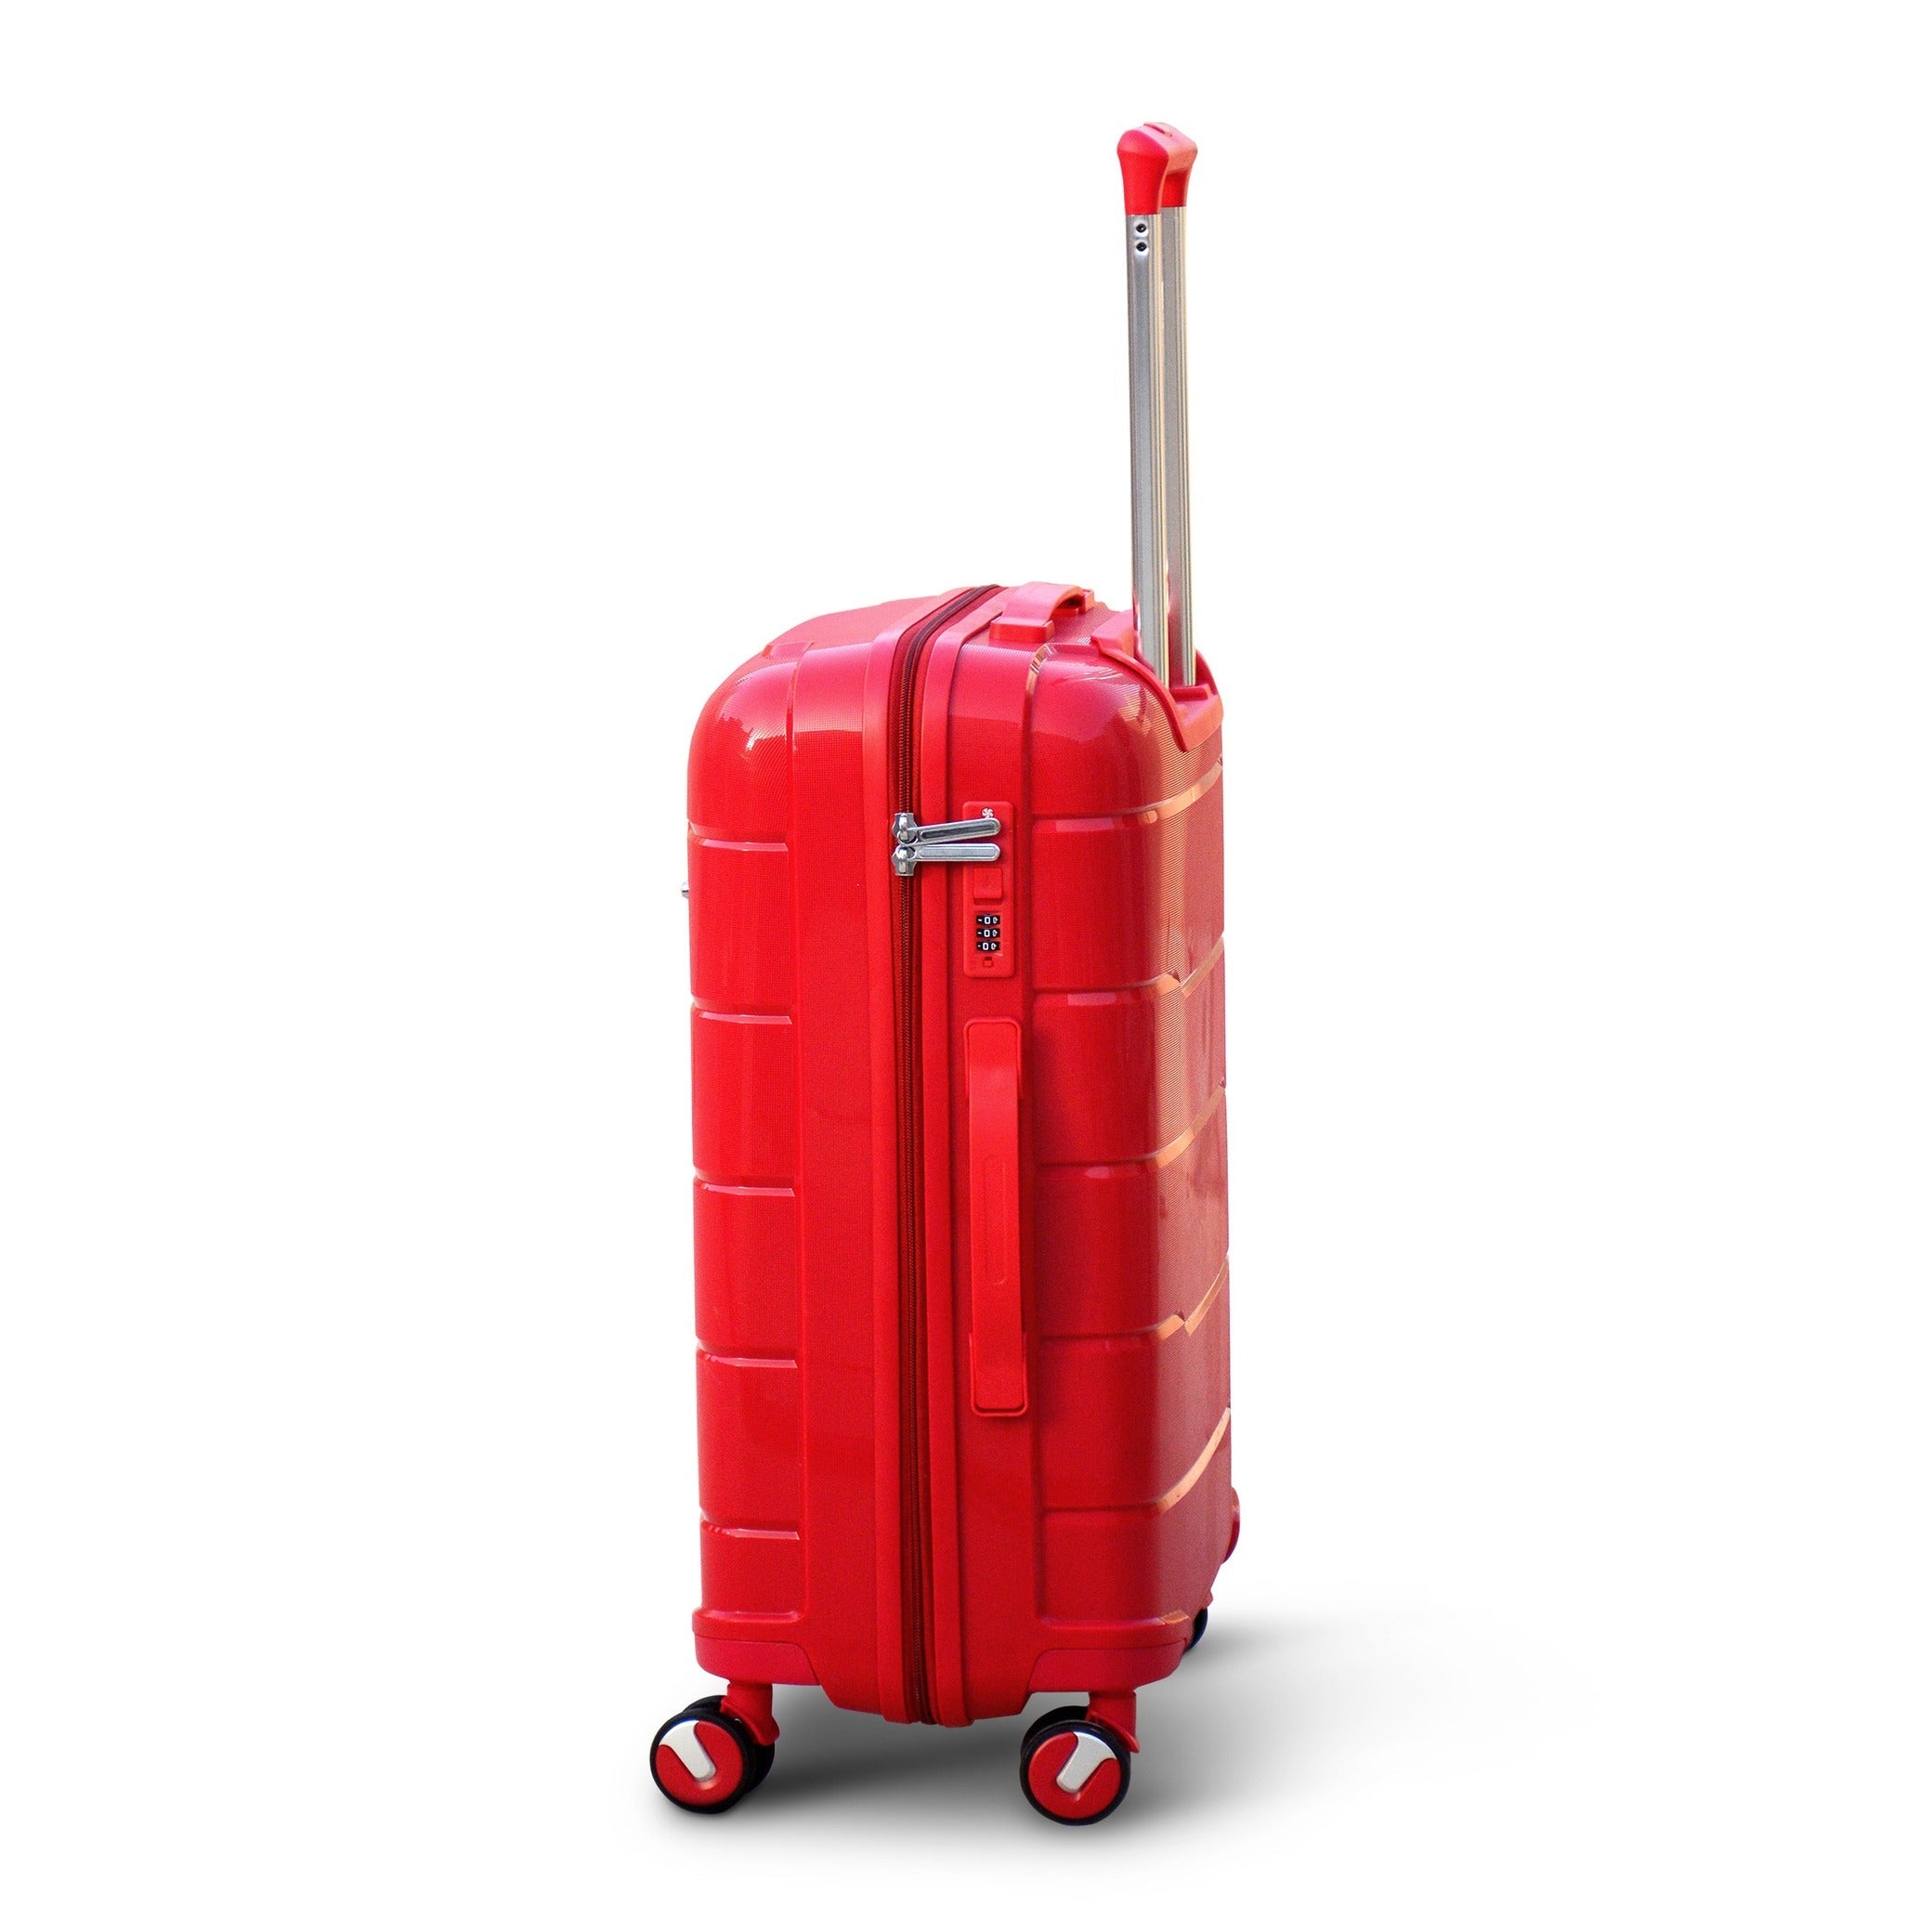 28" Red Colour Ceramic smooth PP Lightweight Luggage Bag with Double Spinner Wheel